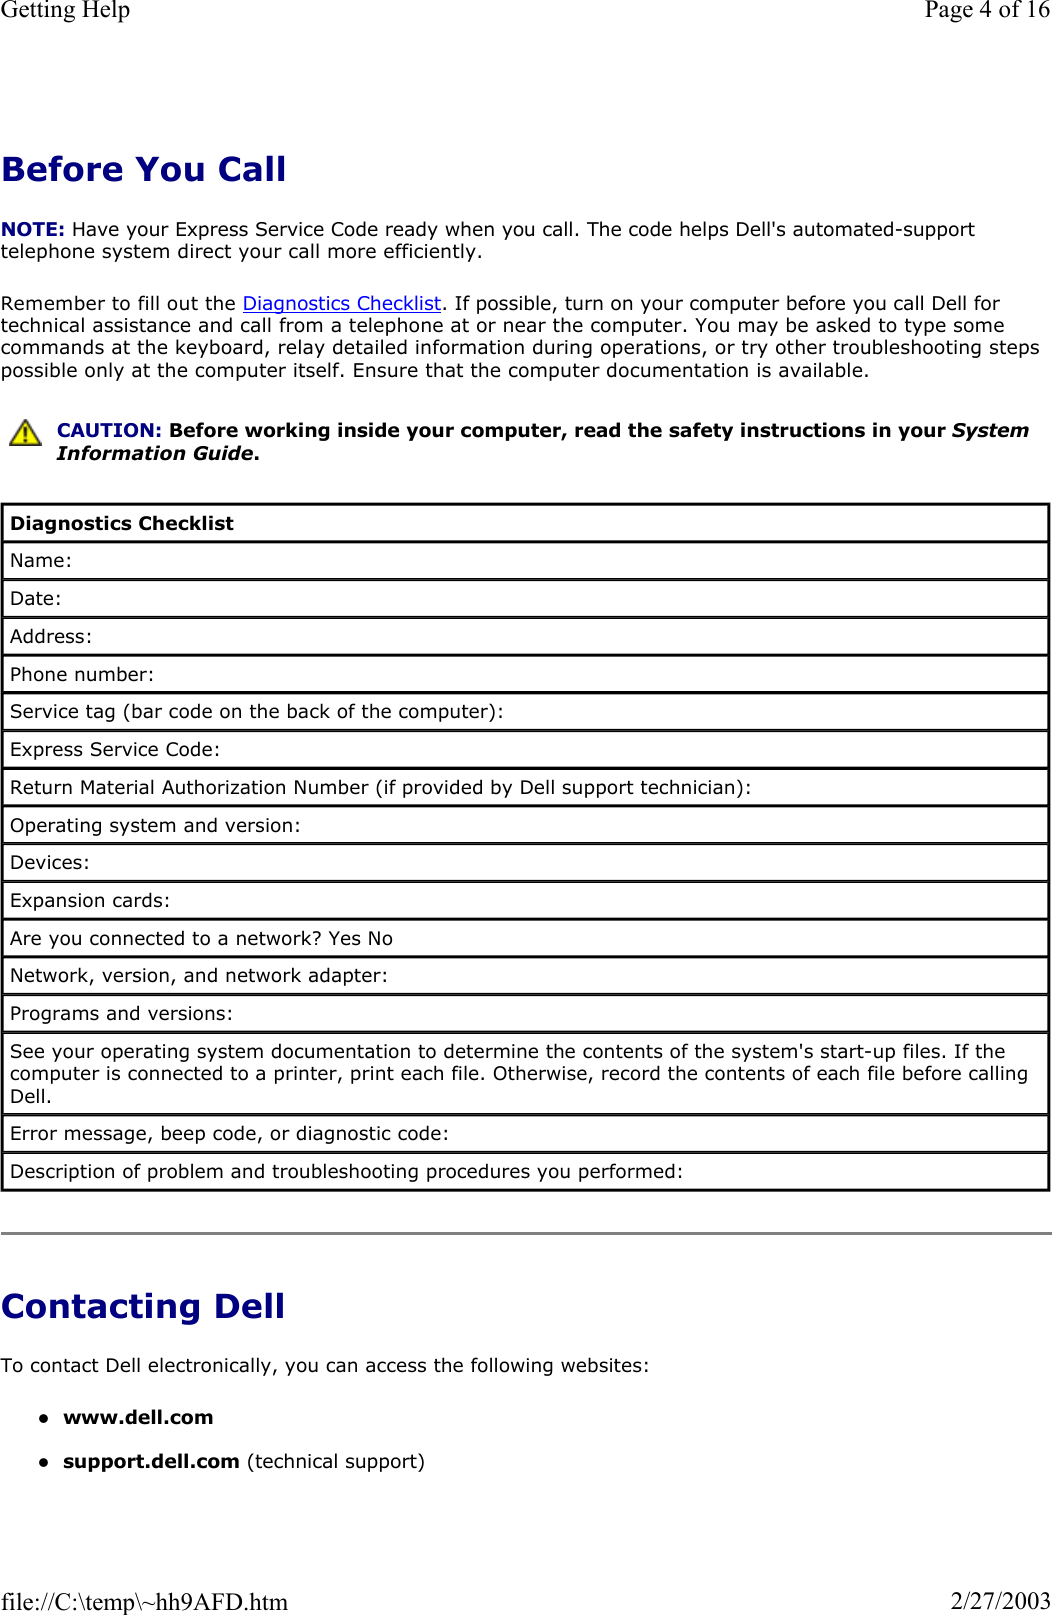 Before You Call NOTE: Have your Express Service Code ready when you call. The code helps Dell&apos;s automated-support telephone system direct your call more efficiently. Remember to fill out the Diagnostics Checklist. If possible, turn on your computer before you call Dell for technical assistance and call from a telephone at or near the computer. You may be asked to type some commands at the keyboard, relay detailed information during operations, or try other troubleshooting steps possible only at the computer itself. Ensure that the computer documentation is available.  Contacting Dell To contact Dell electronically, you can access the following websites: zwww.dell.comzsupport.dell.com (technical support) CAUTION: Before working inside your computer, read the safety instructions in your System Information Guide.Diagnostics Checklist Name: Date: Address: Phone number: Service tag (bar code on the back of the computer): Express Service Code: Return Material Authorization Number (if provided by Dell support technician): Operating system and version: Devices: Expansion cards: Are you connected to a network? Yes No Network, version, and network adapter: Programs and versions: See your operating system documentation to determine the contents of the system&apos;s start-up files. If the computer is connected to a printer, print each file. Otherwise, record the contents of each file before calling Dell. Error message, beep code, or diagnostic code: Description of problem and troubleshooting procedures you performed: Page 4 of 16Getting Help2/27/2003file://C:\temp\~hh9AFD.htm